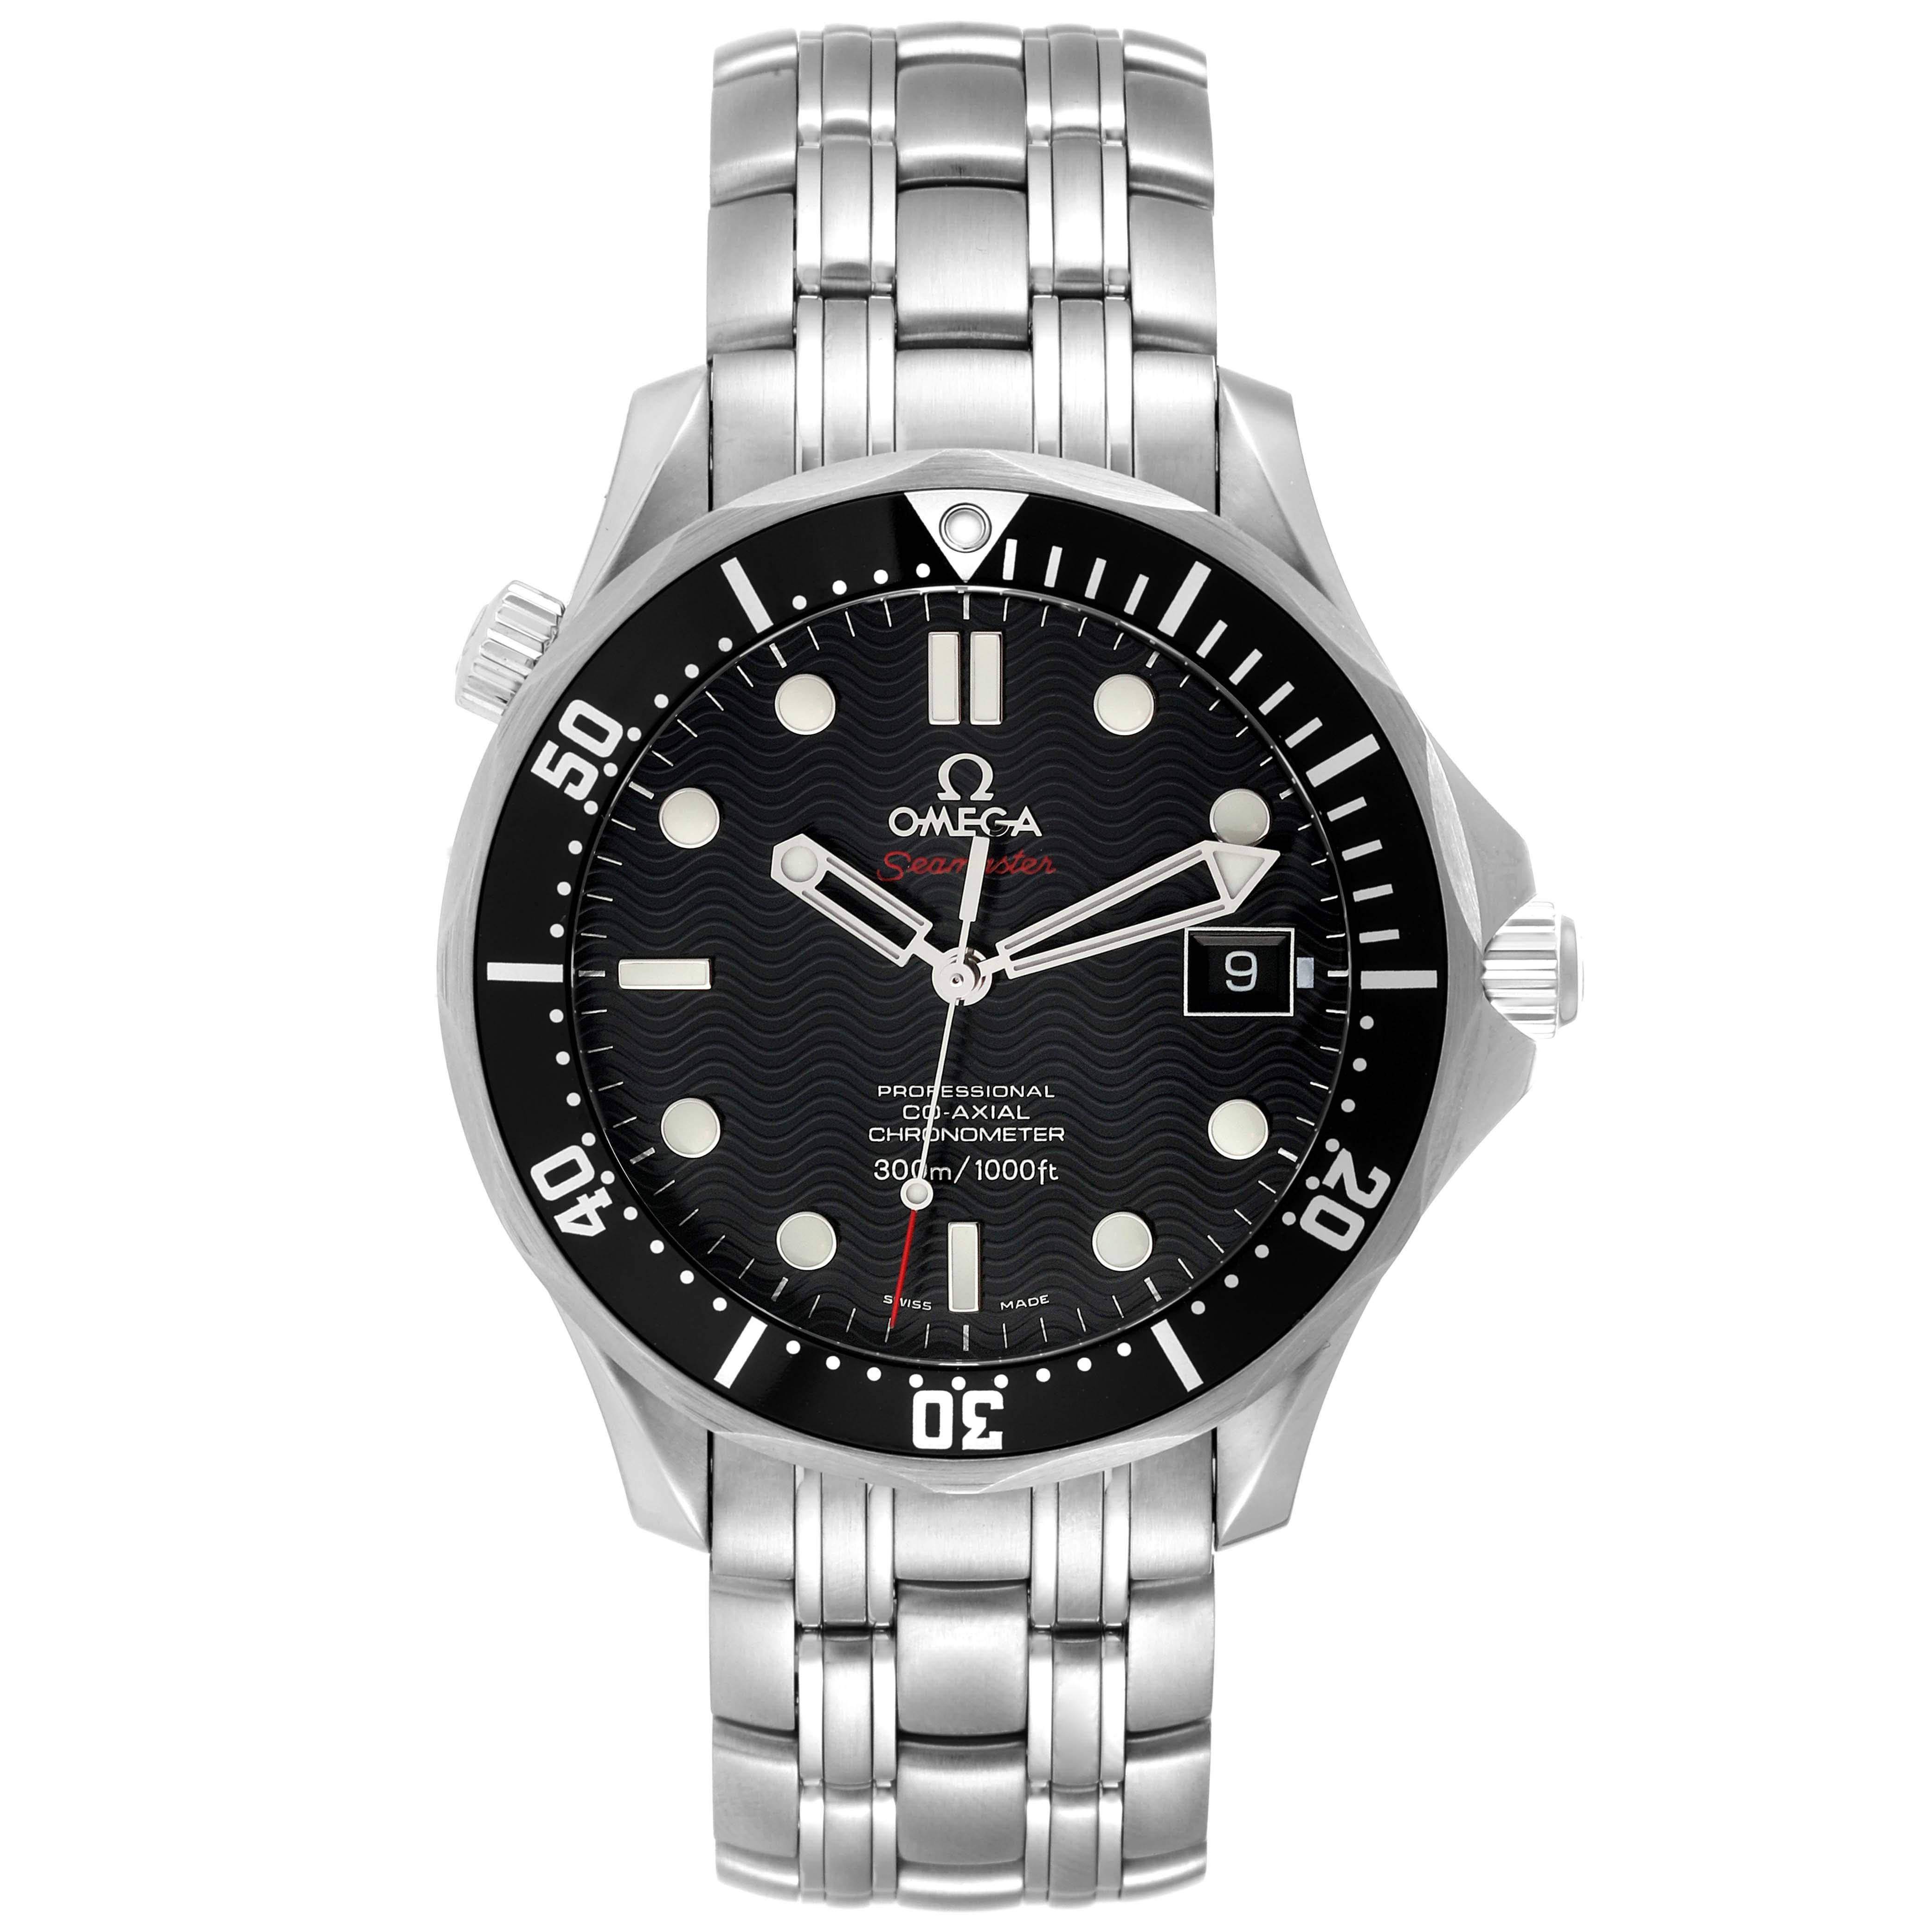 Omega Seamaster Black Dial Steel Mens Watch 212.30.41.20.01.002. Automatic self-winding movement. Stainless steel case 41.0 mm in diameter. Helium escape valve at 10 o'clock. Omega logo on the crown. Black unidirectional rotating bezel. Scratch